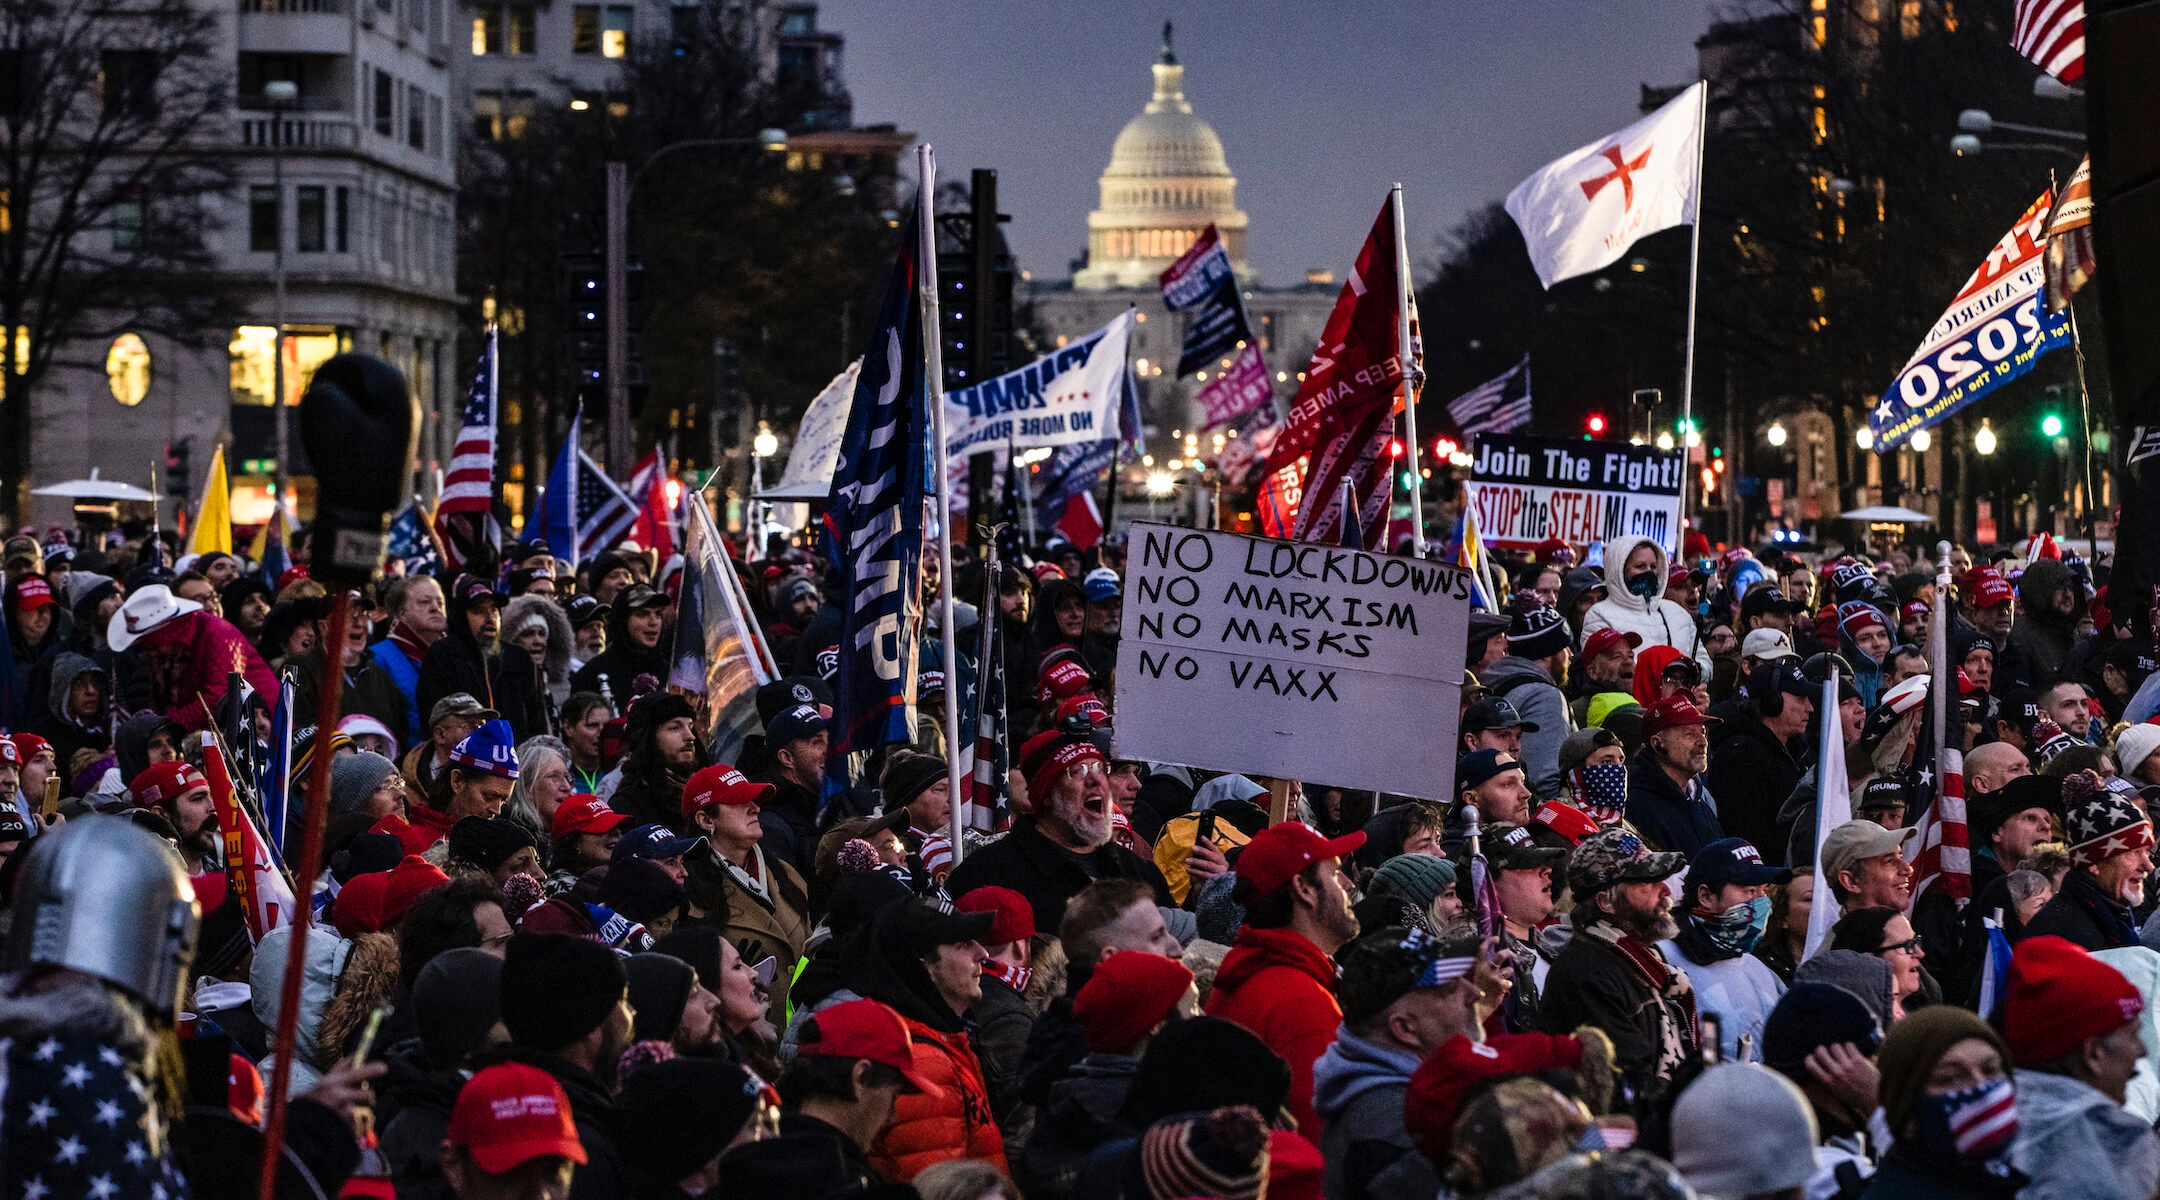 Supporters of President Donald Trump gather for a rally at Freedom Plaza in Washington, DC on January 5, 2021. A string of extremists are expected at the rally. (Samuel Corum/Getty Images)